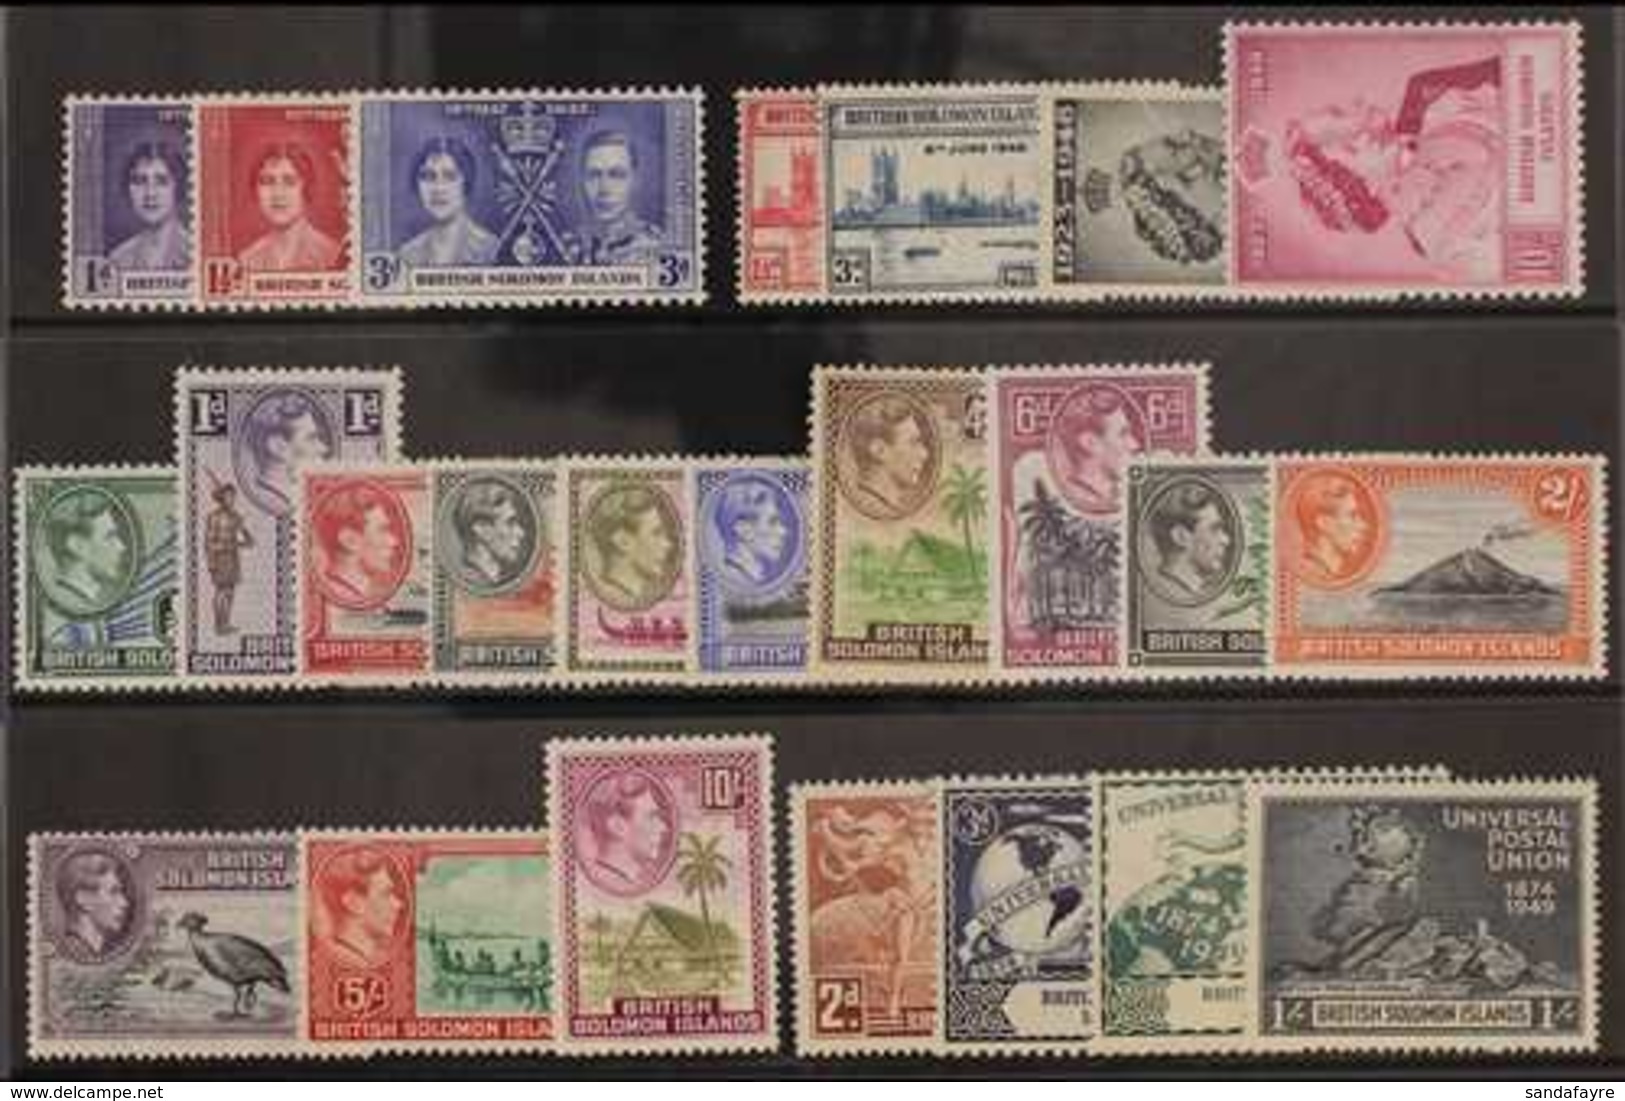 1937-52 COMPLETE KGVI MINT COLLECTION Presented On A Stock Card, Coronation To UPU, SG 57/80, Very Fine Mint (24 Stamps) - Salomonseilanden (...-1978)